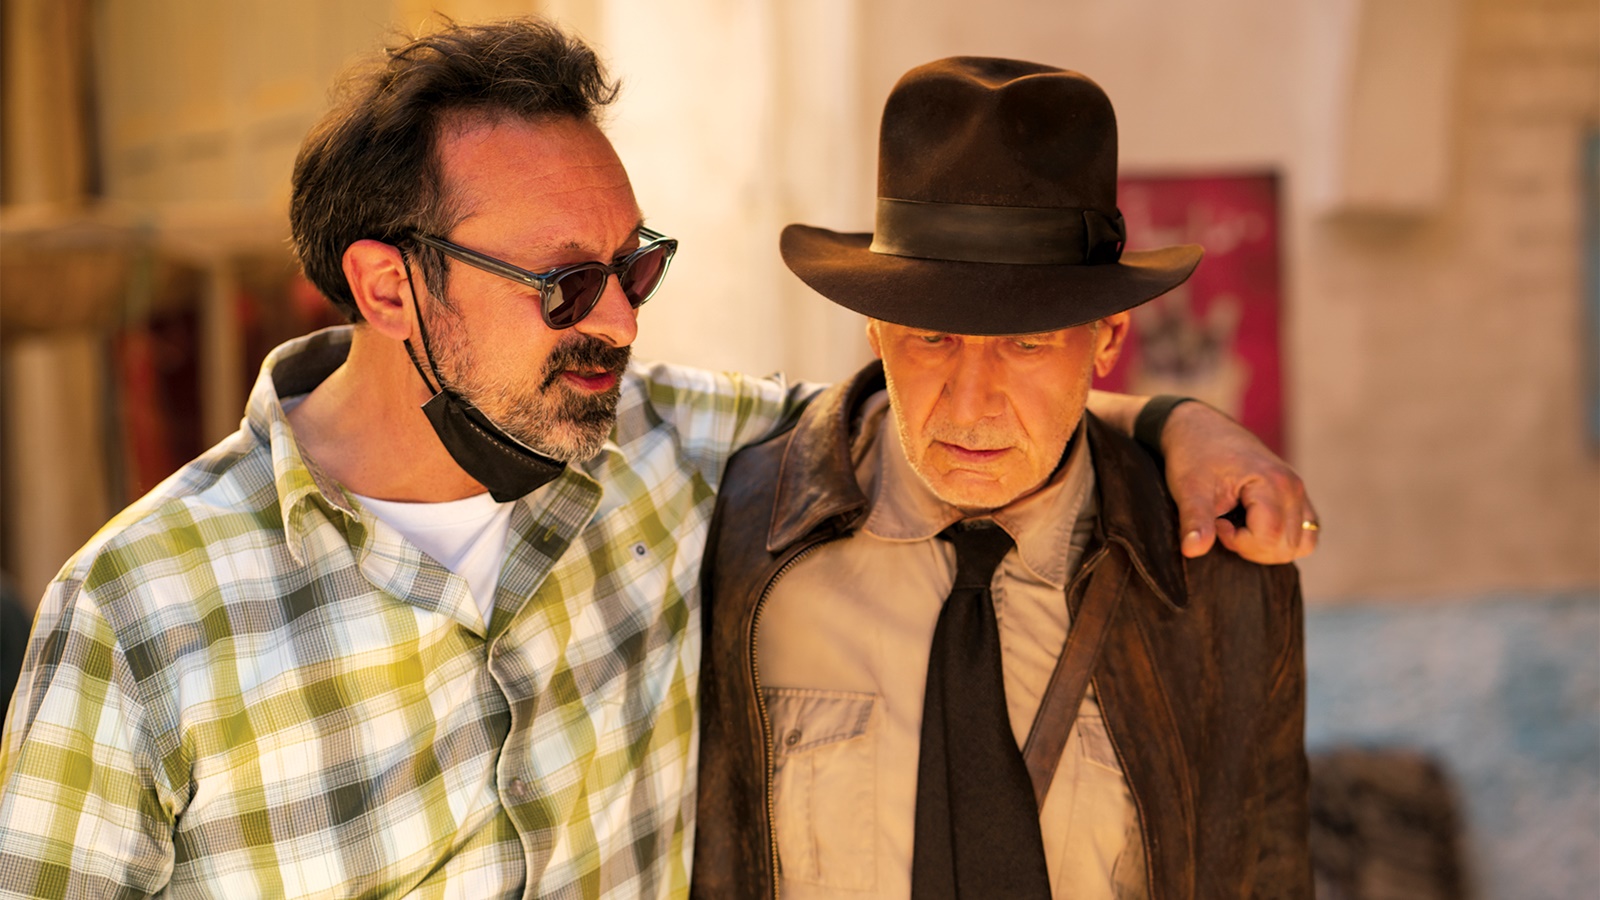 Indiana Jones and the Quadrant of Destiny, James Mangold responds to negative criticism: 'They will fade away'